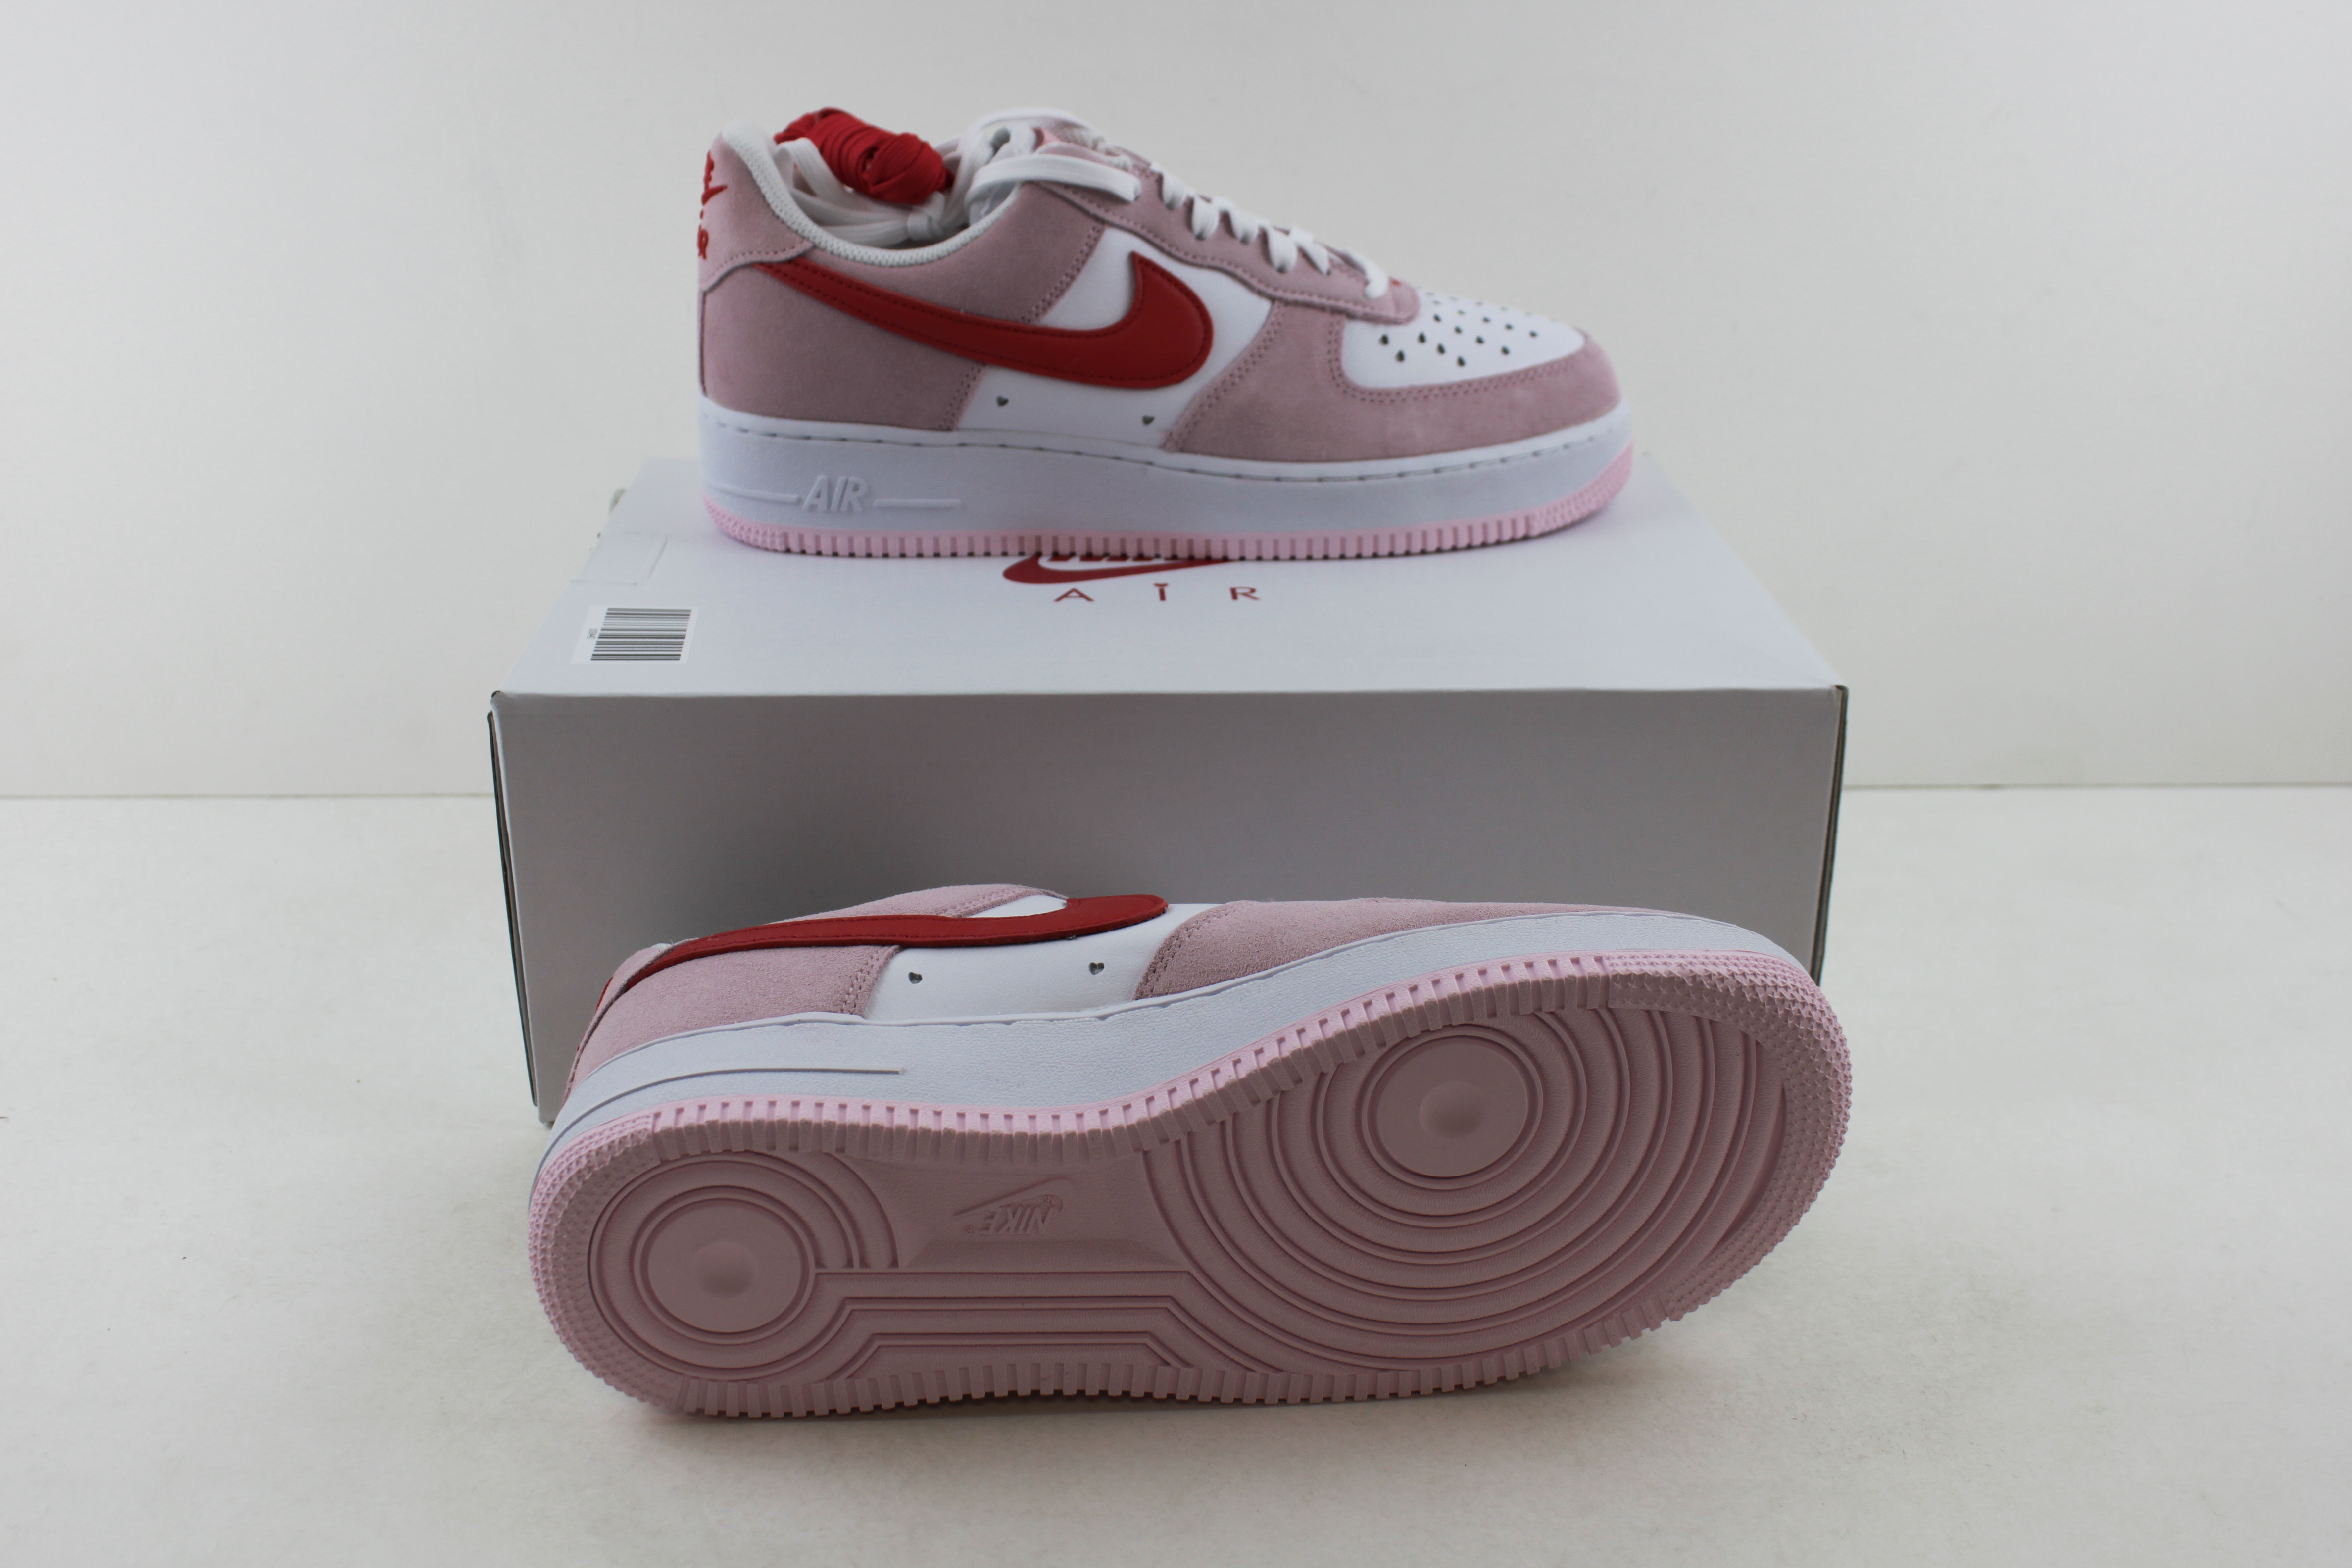 Nike Men's Air Force 1 Low 07 Trainers, QS Valentine's Day 'Love Letter' Edition, Tulip Rose, UK 8.5 - Image 2 of 4